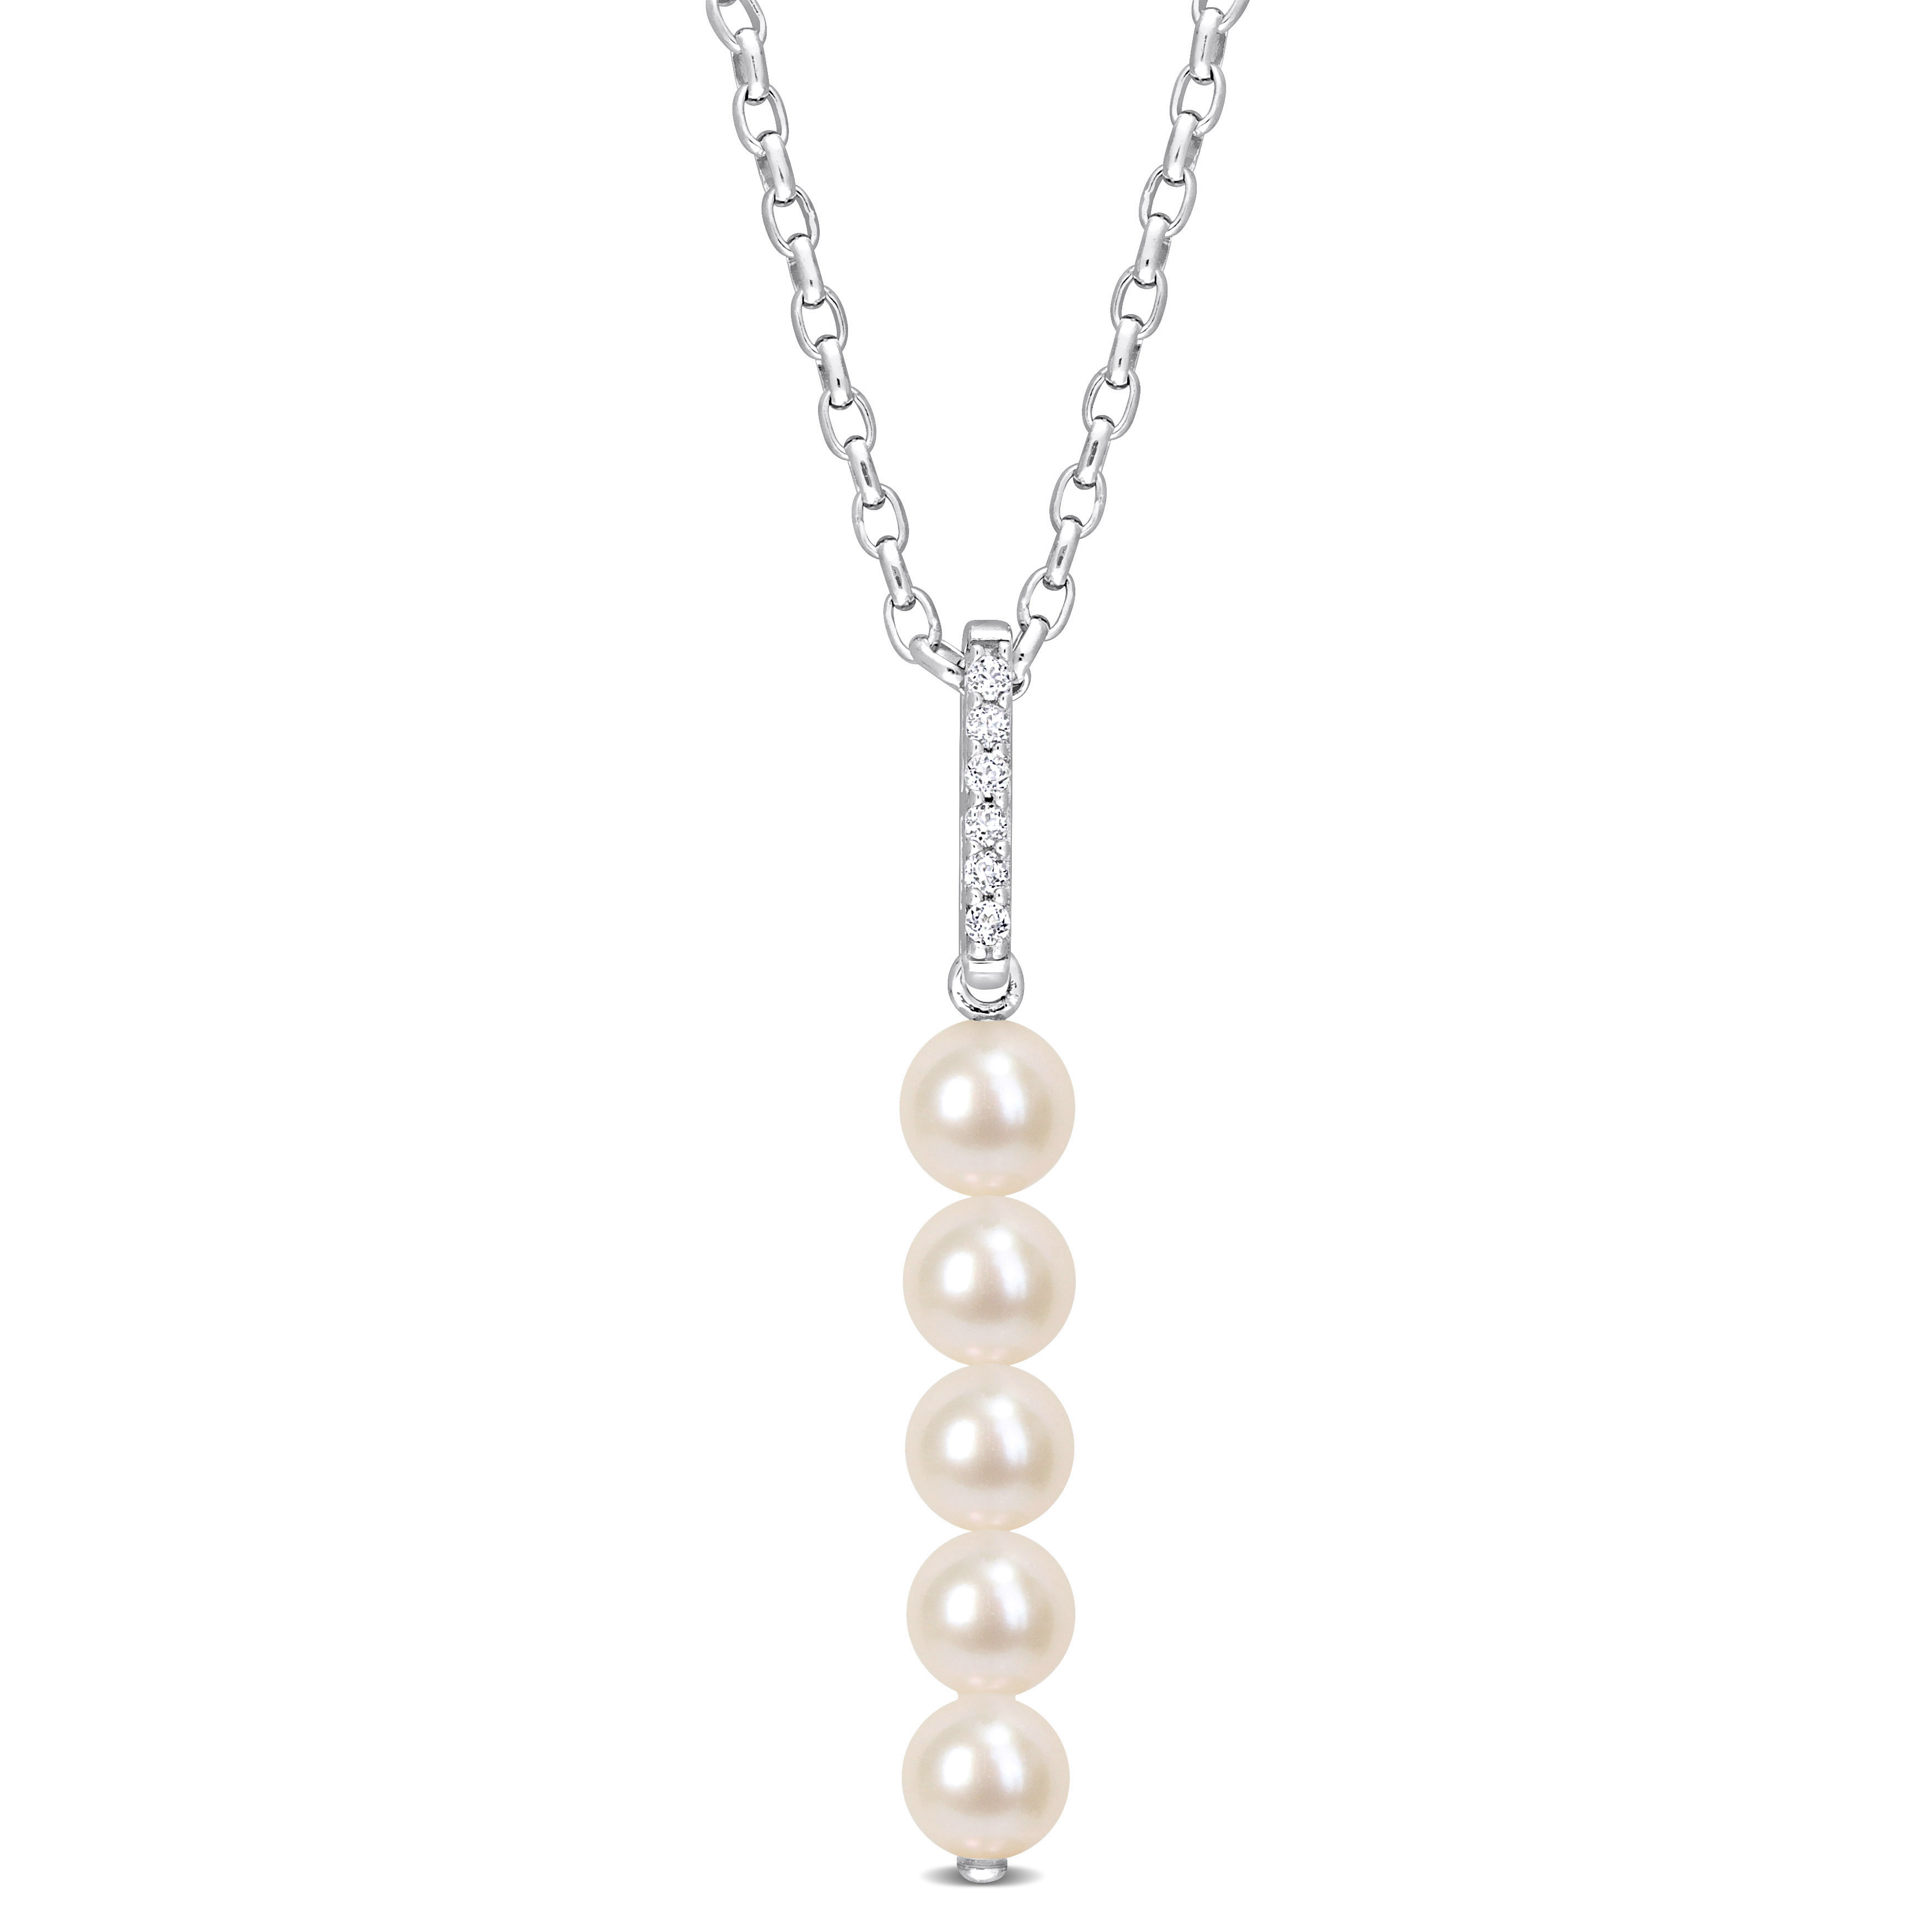 5.5-6 MM Freshwater Cultured Pearl and 1/5 CT TGW White Topaz Drop Pendant with Chain in Sterling Silver - 18 in.